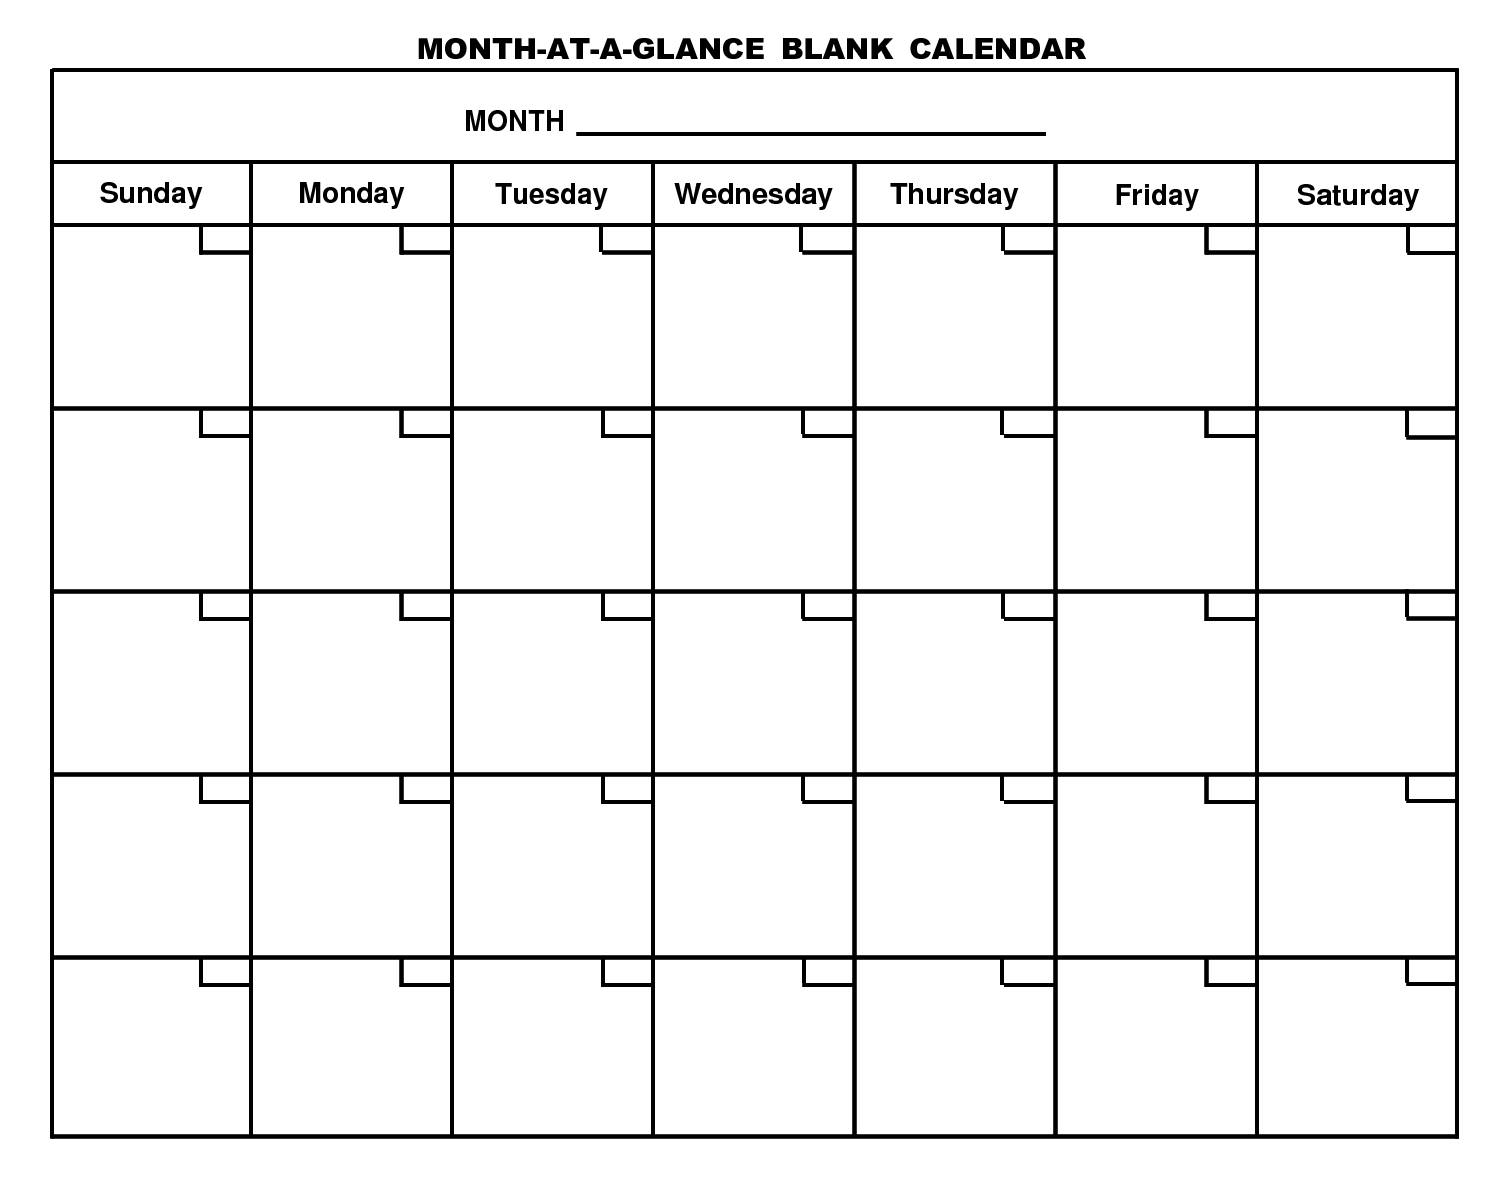 Pin By Stacy Tangren On Work | Free Printable Calendar Perky Blank Monthly Planner No Dates